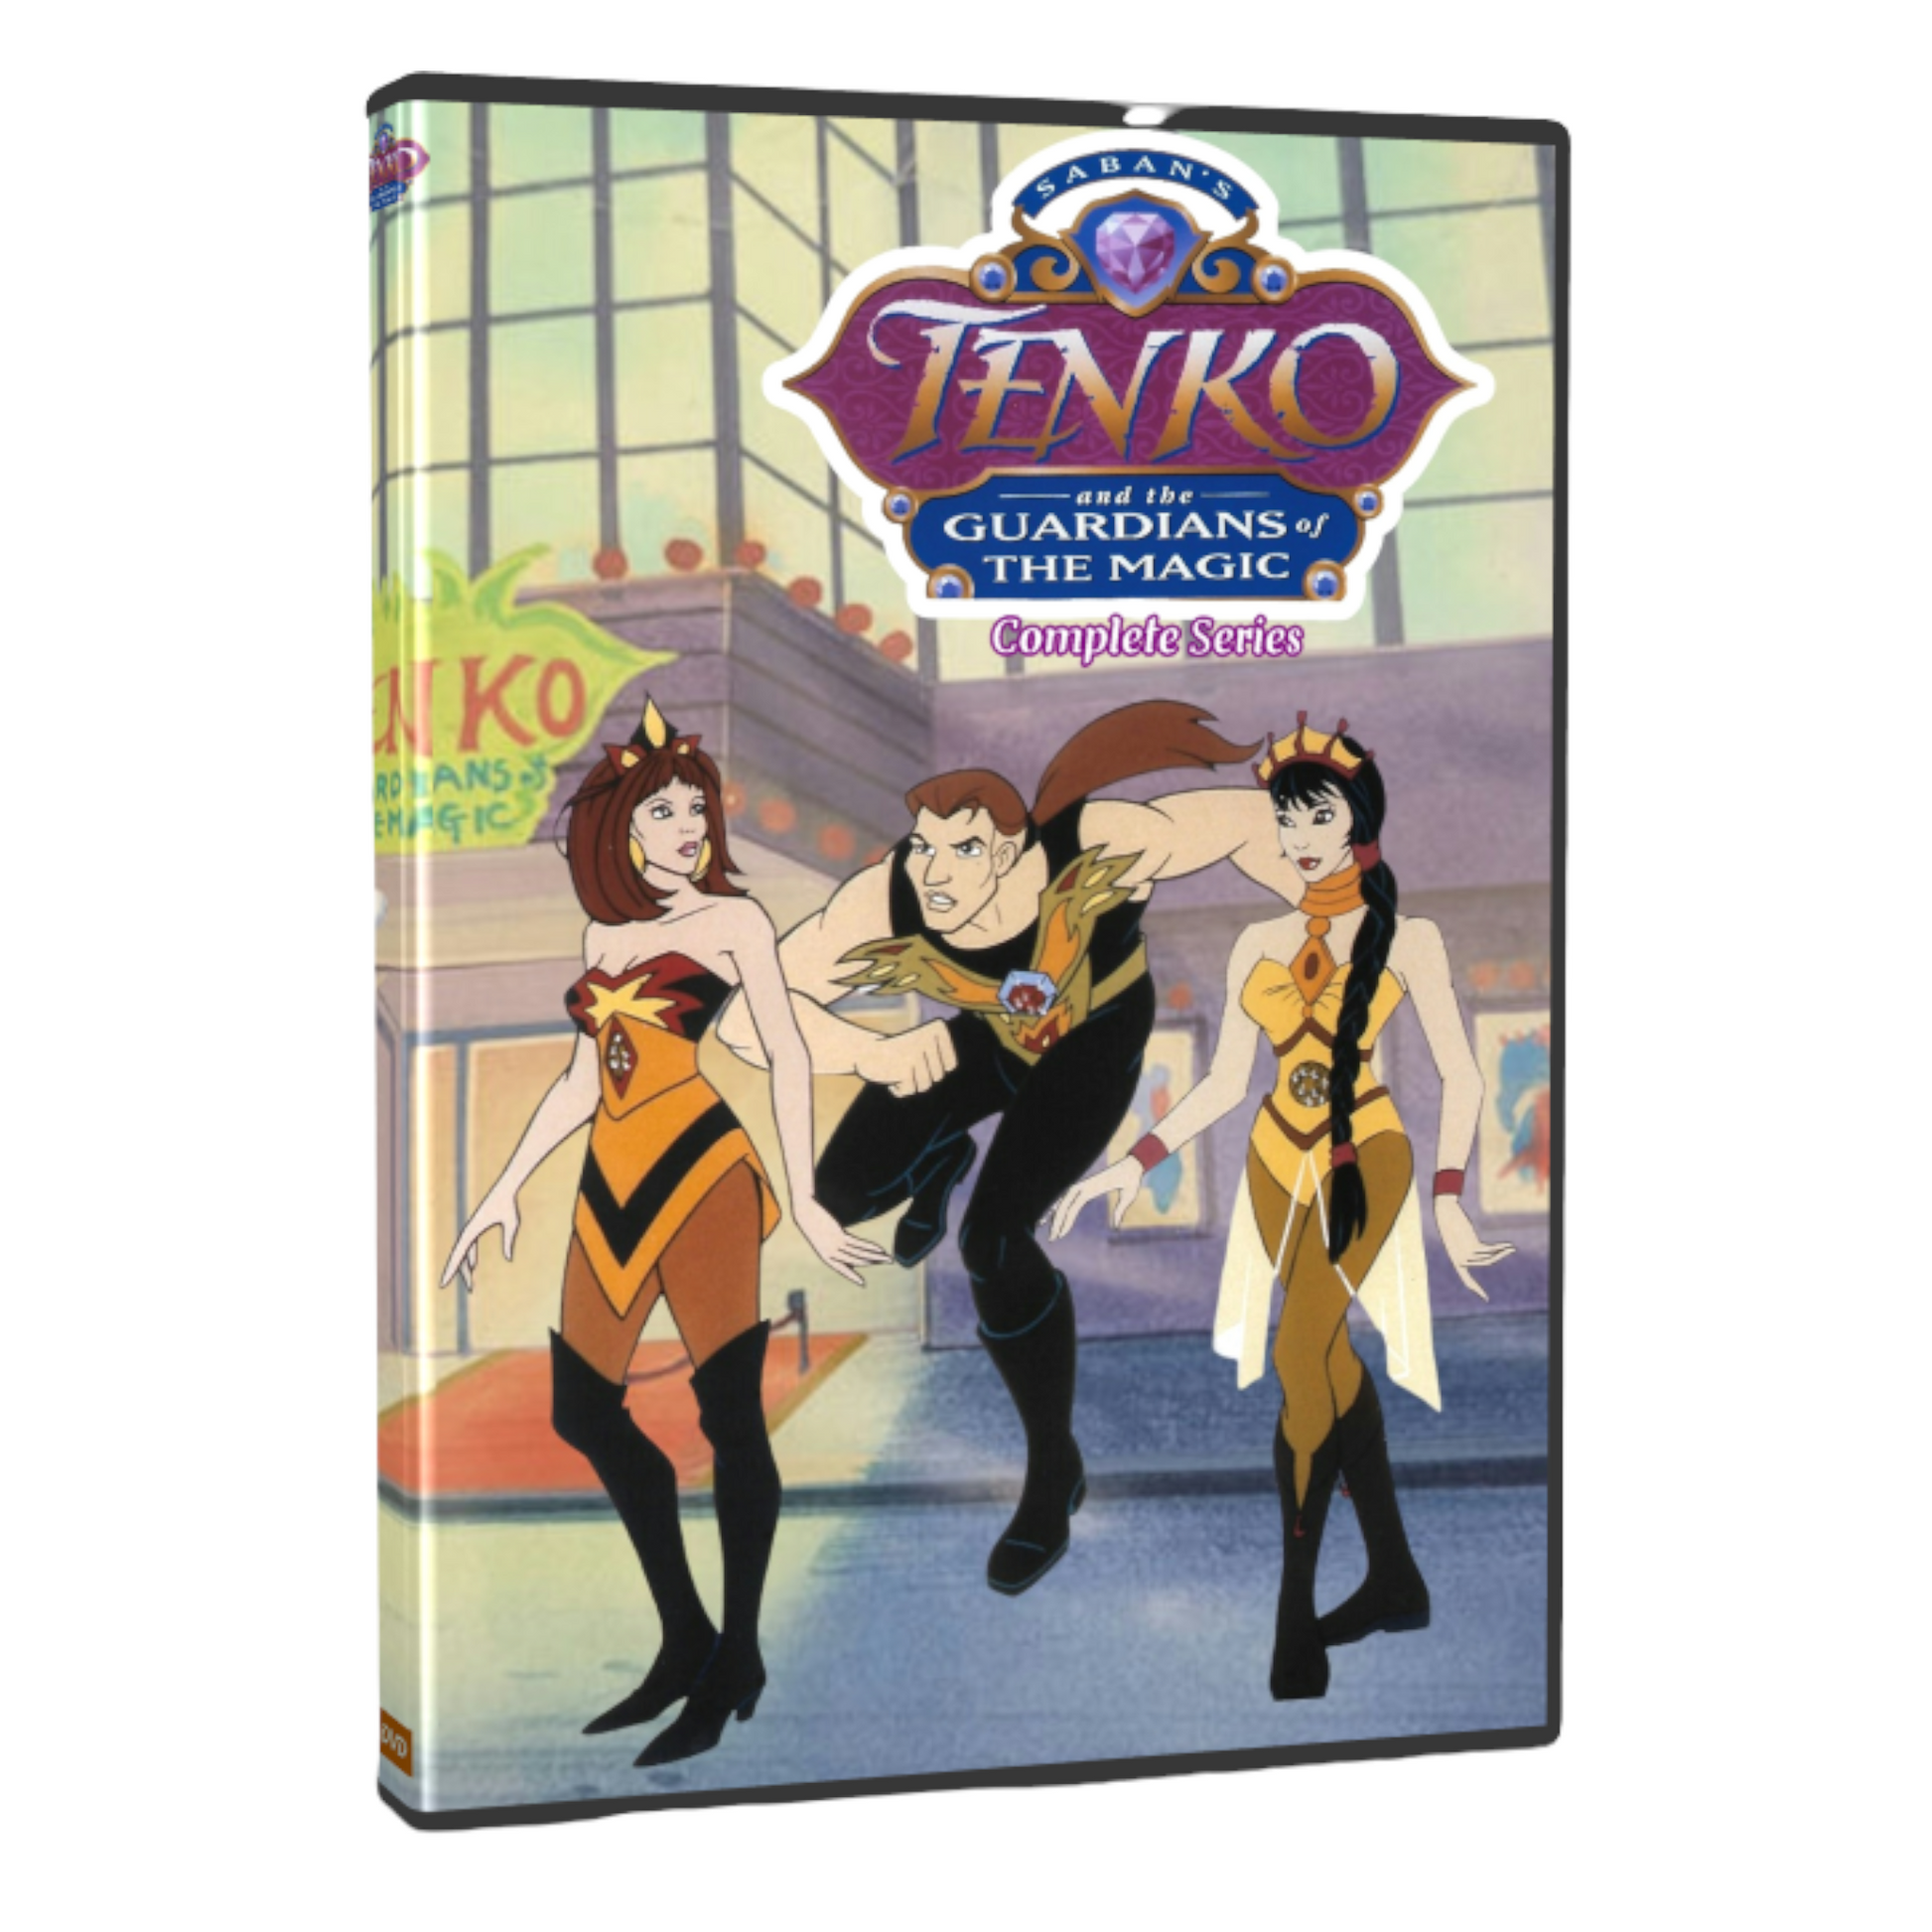 Tenko and the Guardians of the Magic Complete Series DVD Set - RetroAnimation 